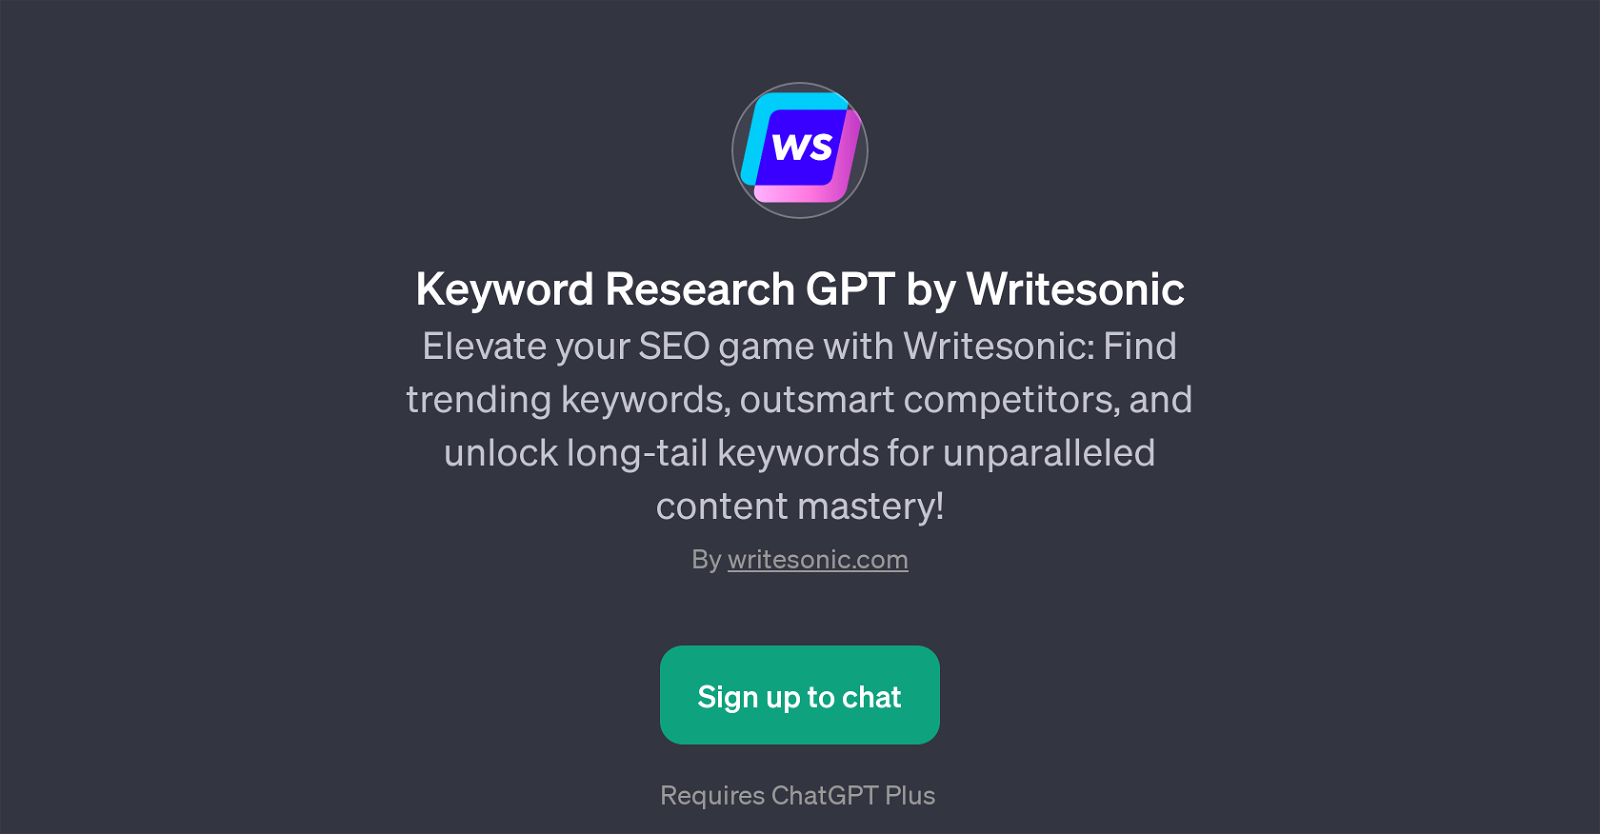 Keyword Research GPT by Writesonic website